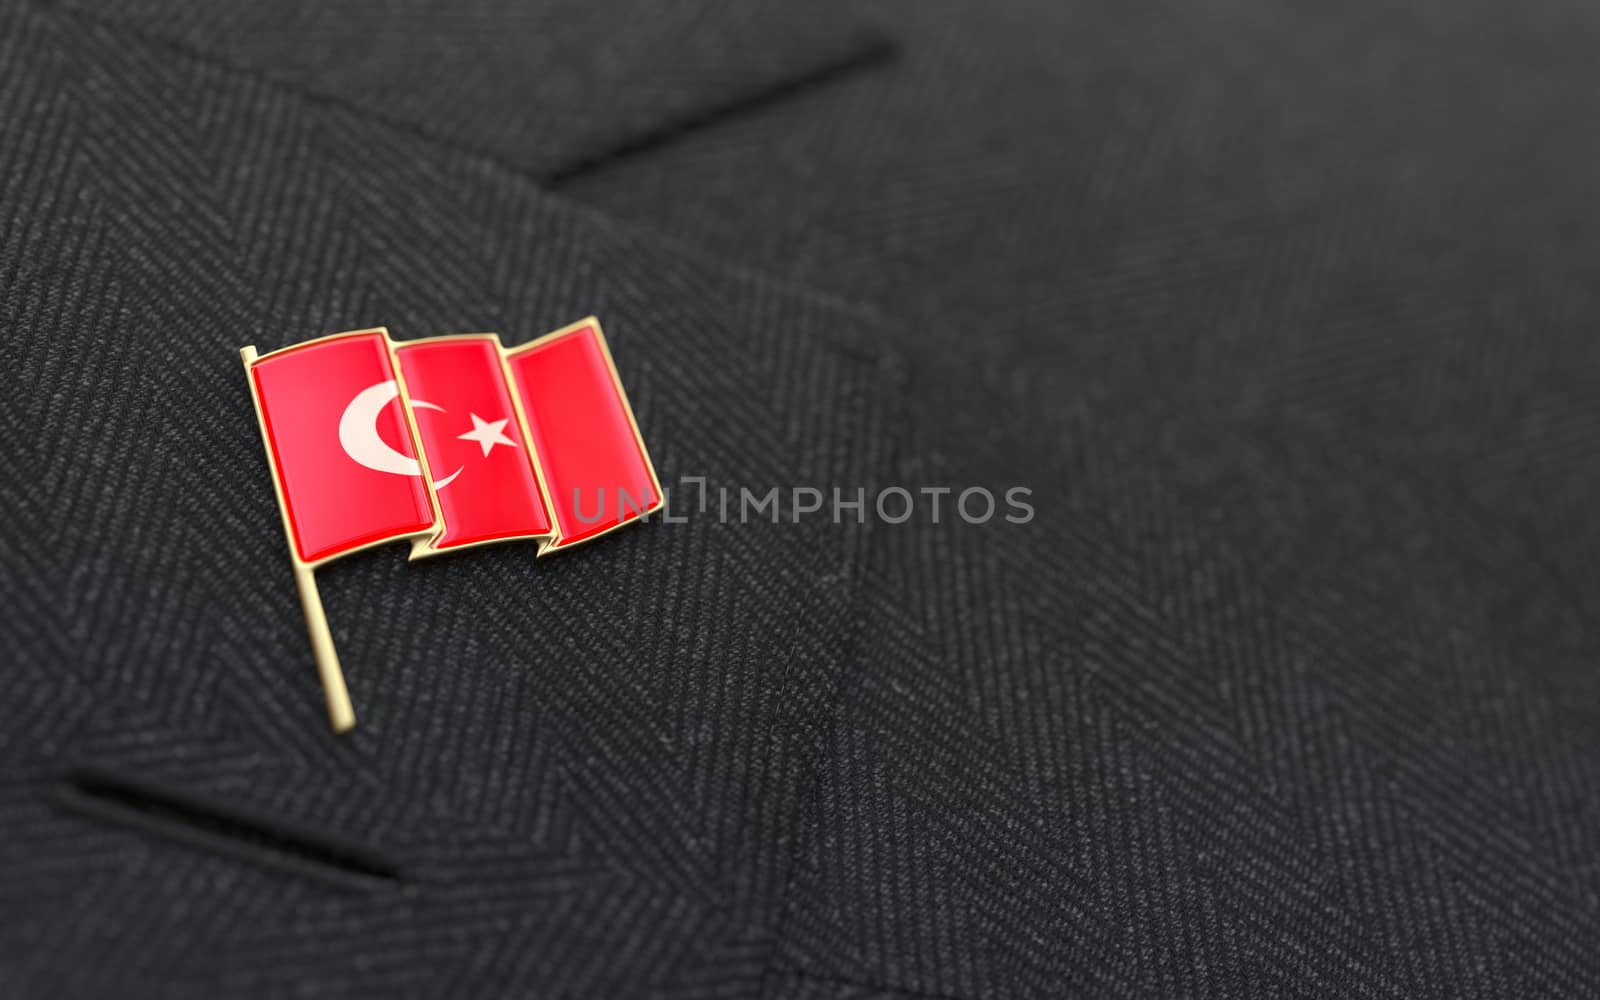 Turkey flag lapel pin on the collar of a business suit jacket shows patriotism